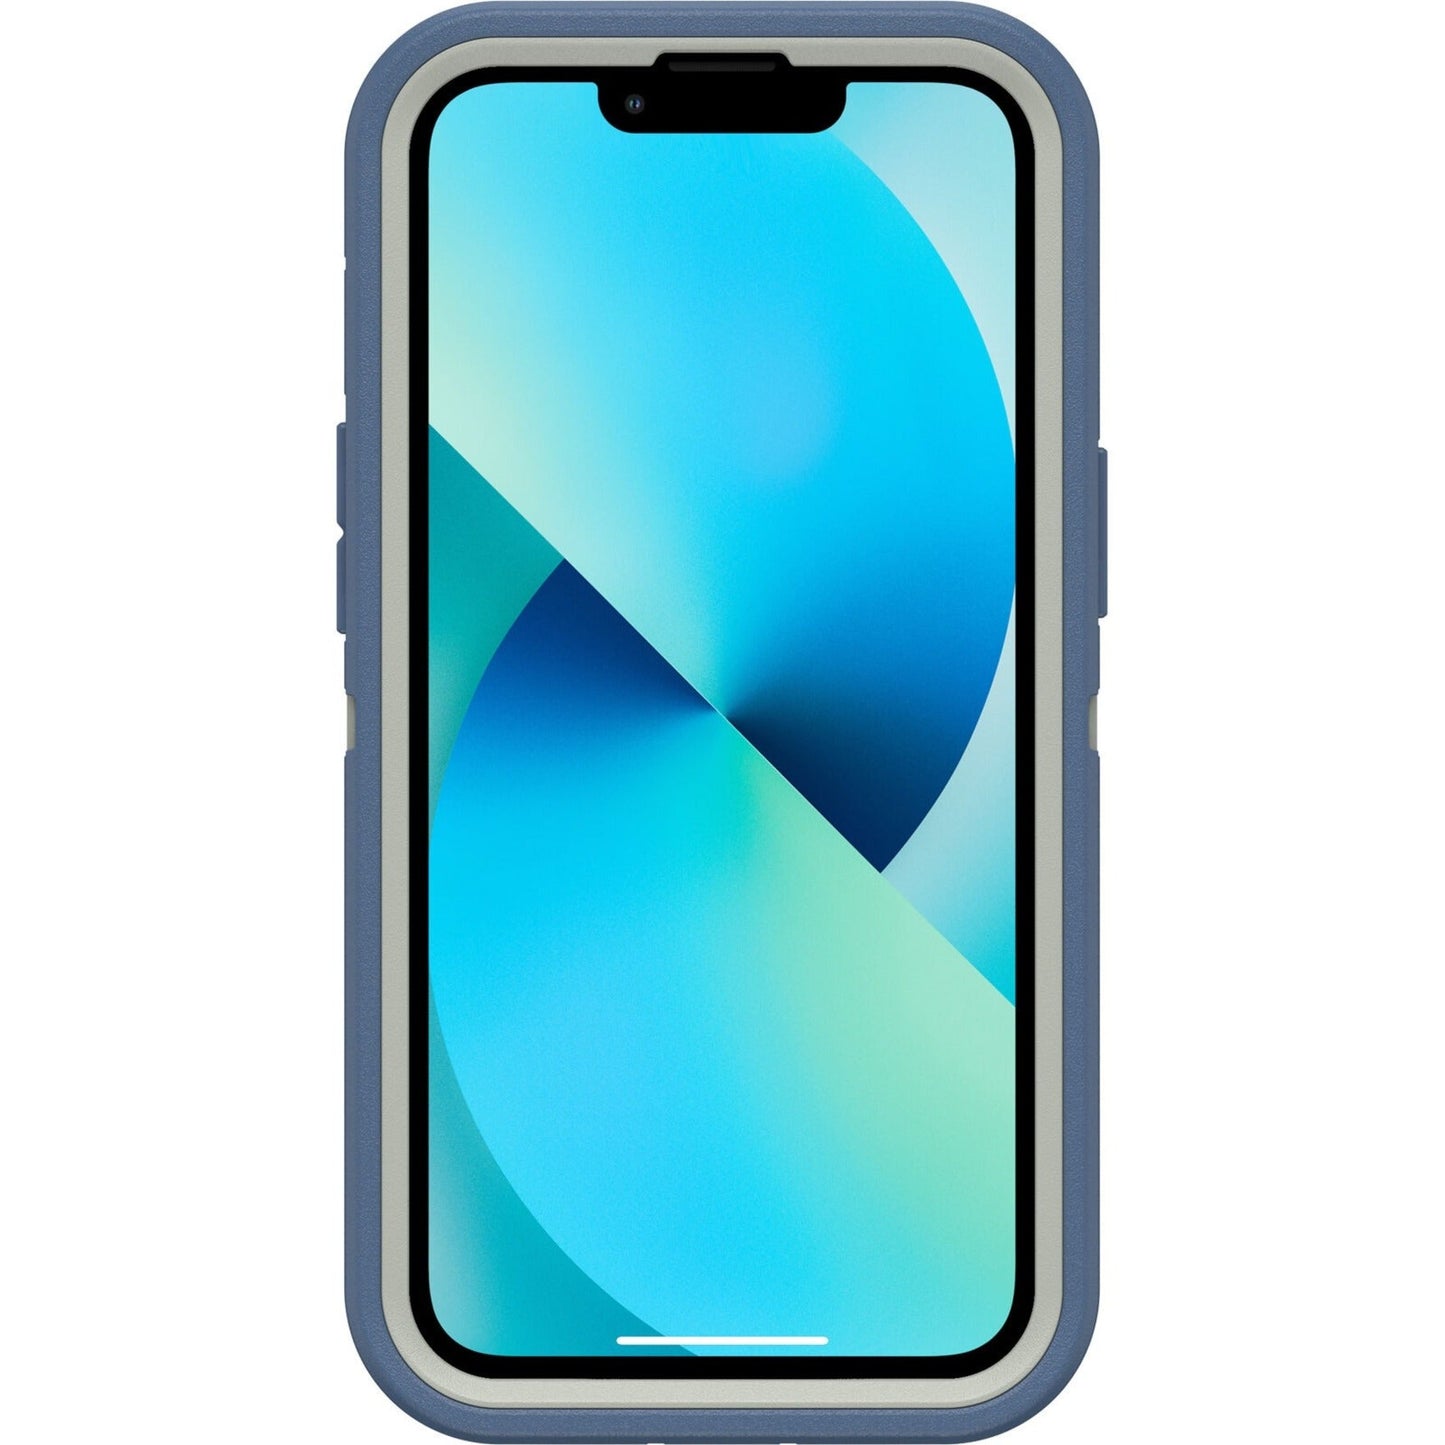 OtterBox Defender Rugged Carrying Case (Holster) Apple iPhone 13 Smartphone - Fort Blue